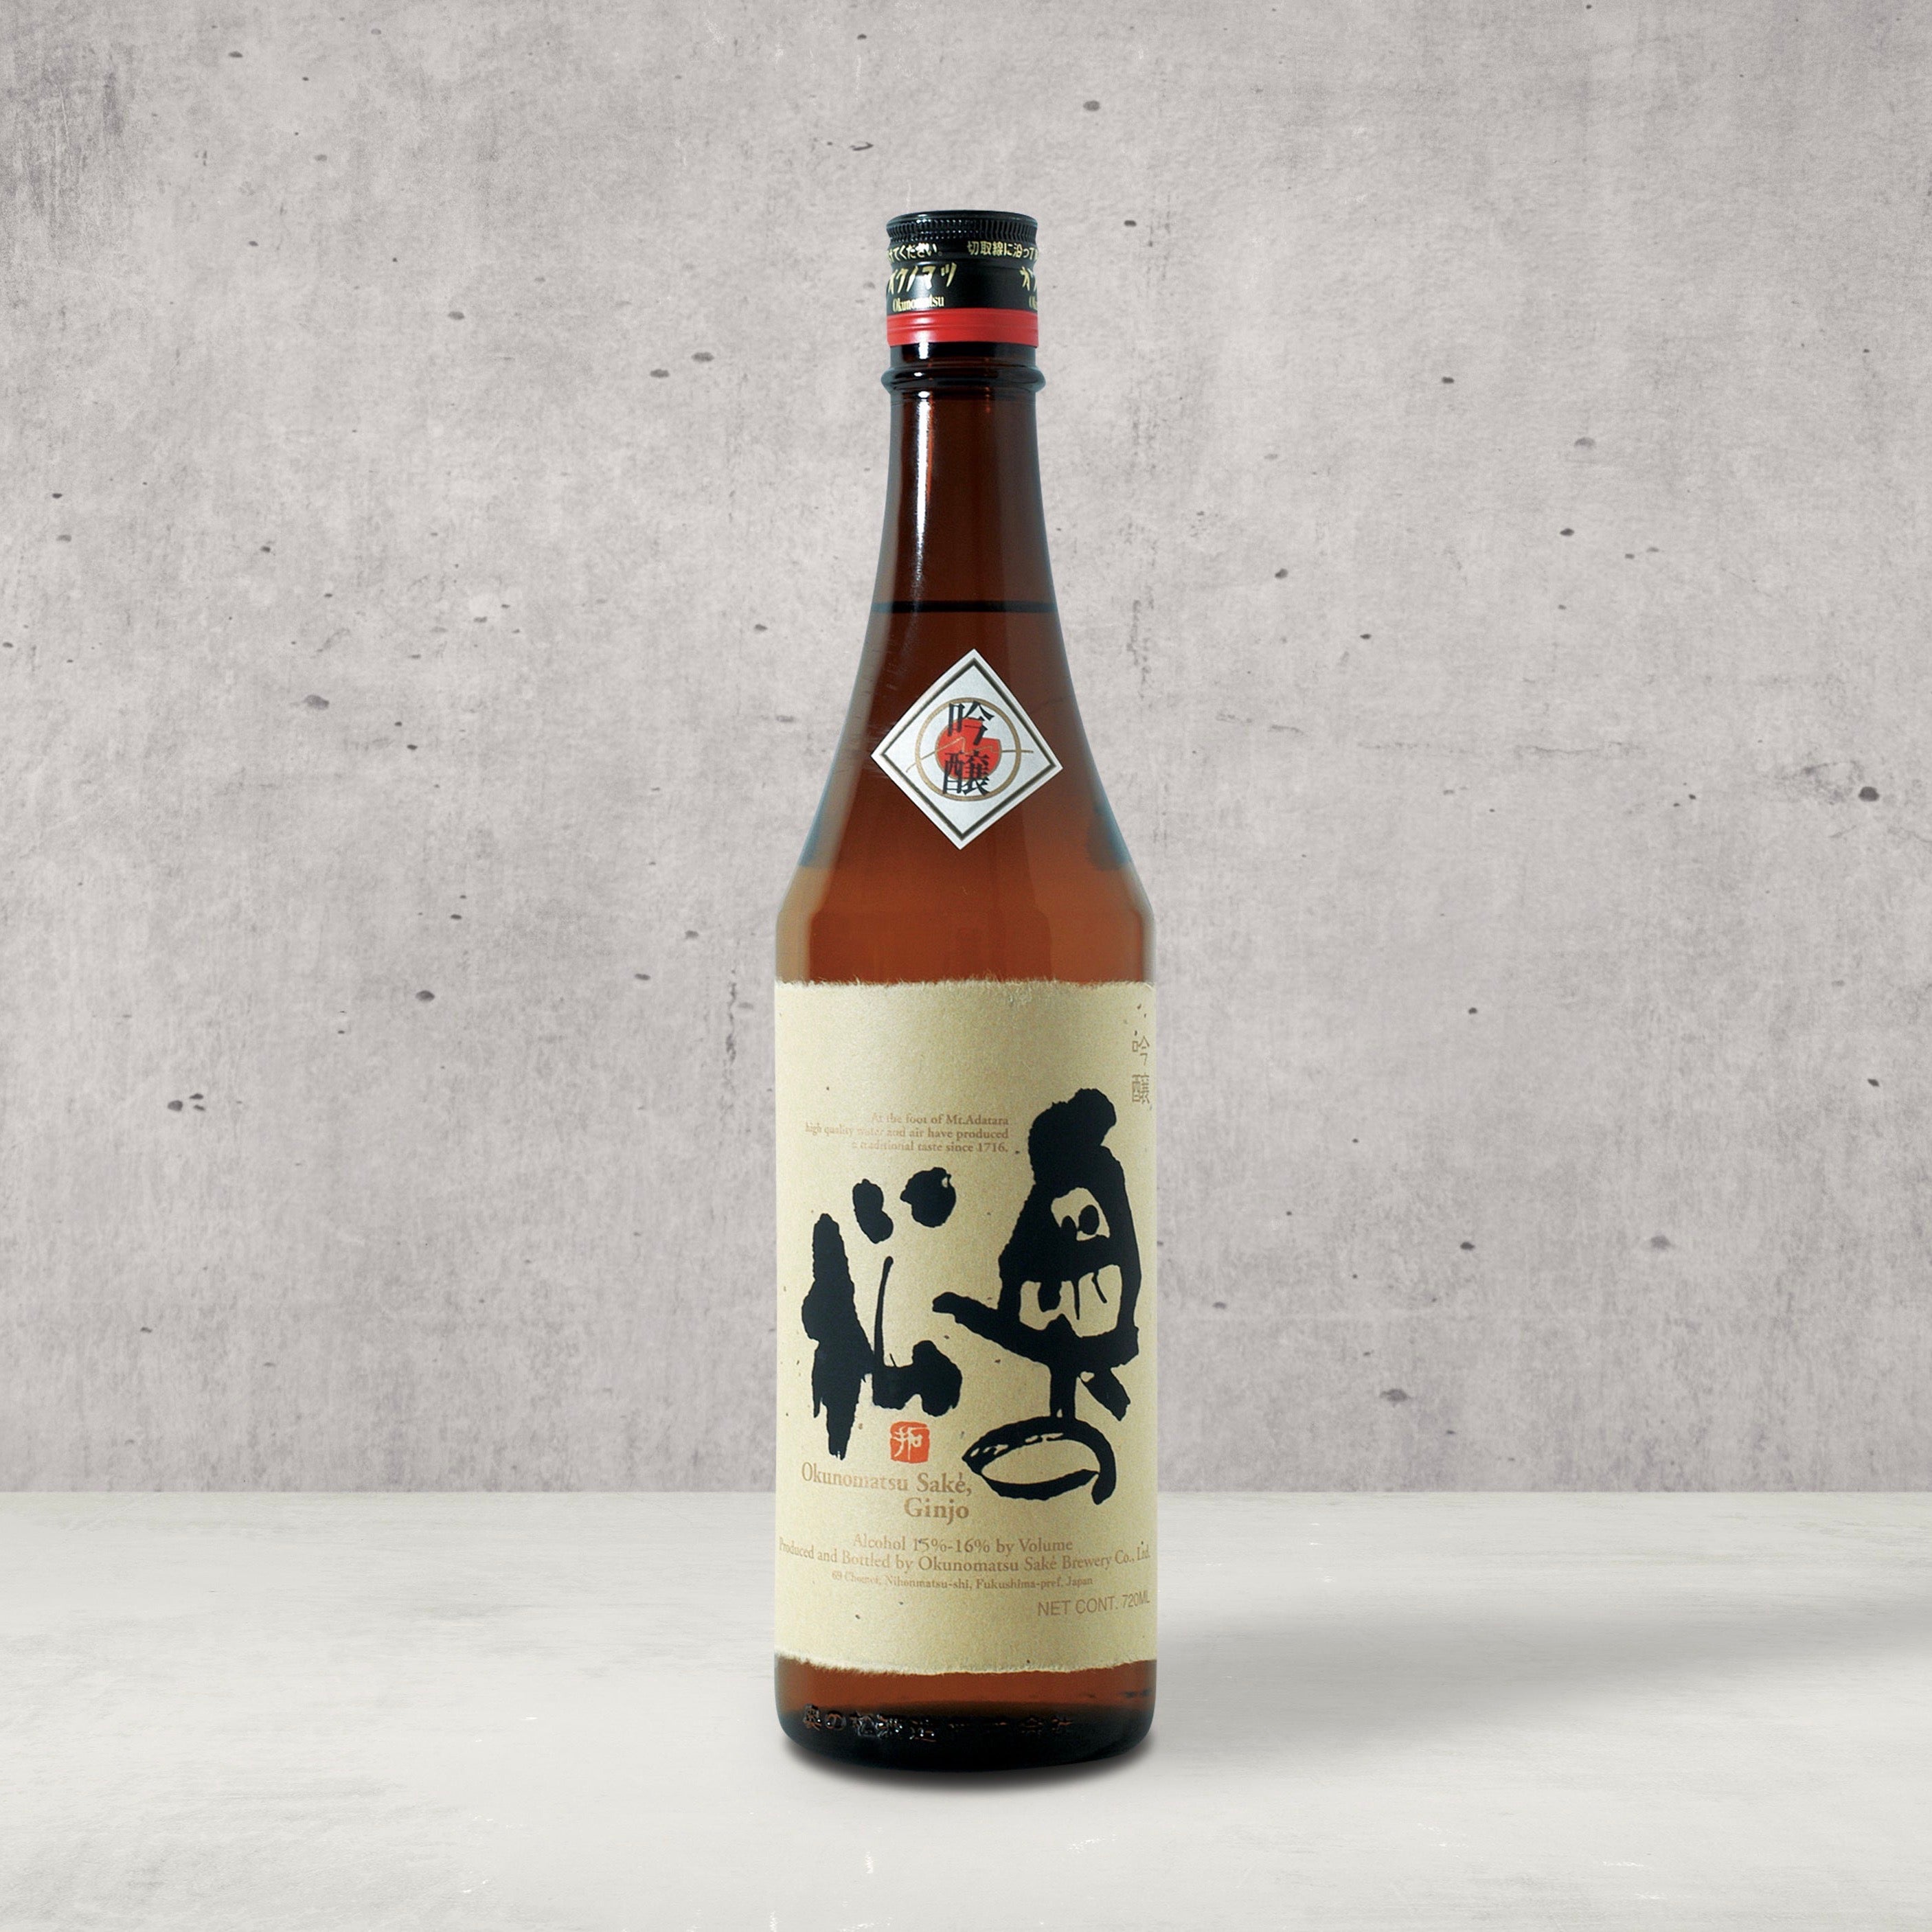 Okunomatsu Ginjo Sake. An ethereal ginjo that drinks like a daiginjo; in fact, a great lateral move (well, a promotion, but we're biased) for Italian pinot grigio drinkers. Not your average ginjo, it has complexity, depth, and a wide range of interesting and diverse flavors, and a good balance of acidity and sweetness. Bursting cacophony of juicy flavors that vanishes to a quiet, clean finish like a wisp of smoke of a tea candle. International Wine Challenge 2018 Champion Sake